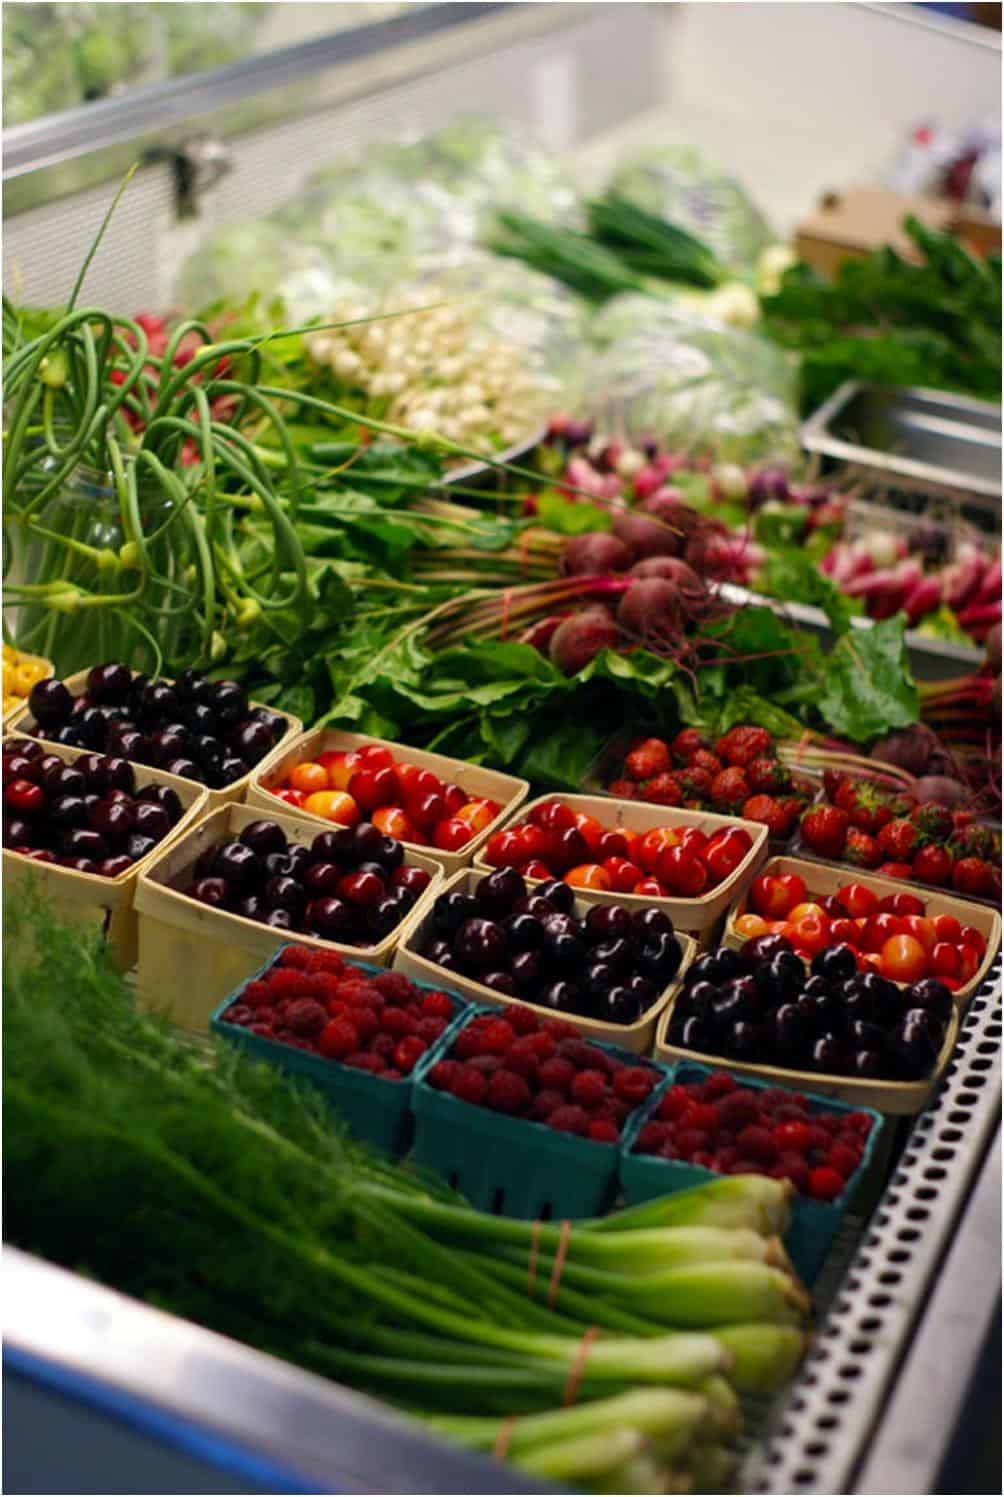 Cherries and other produce in a produce case